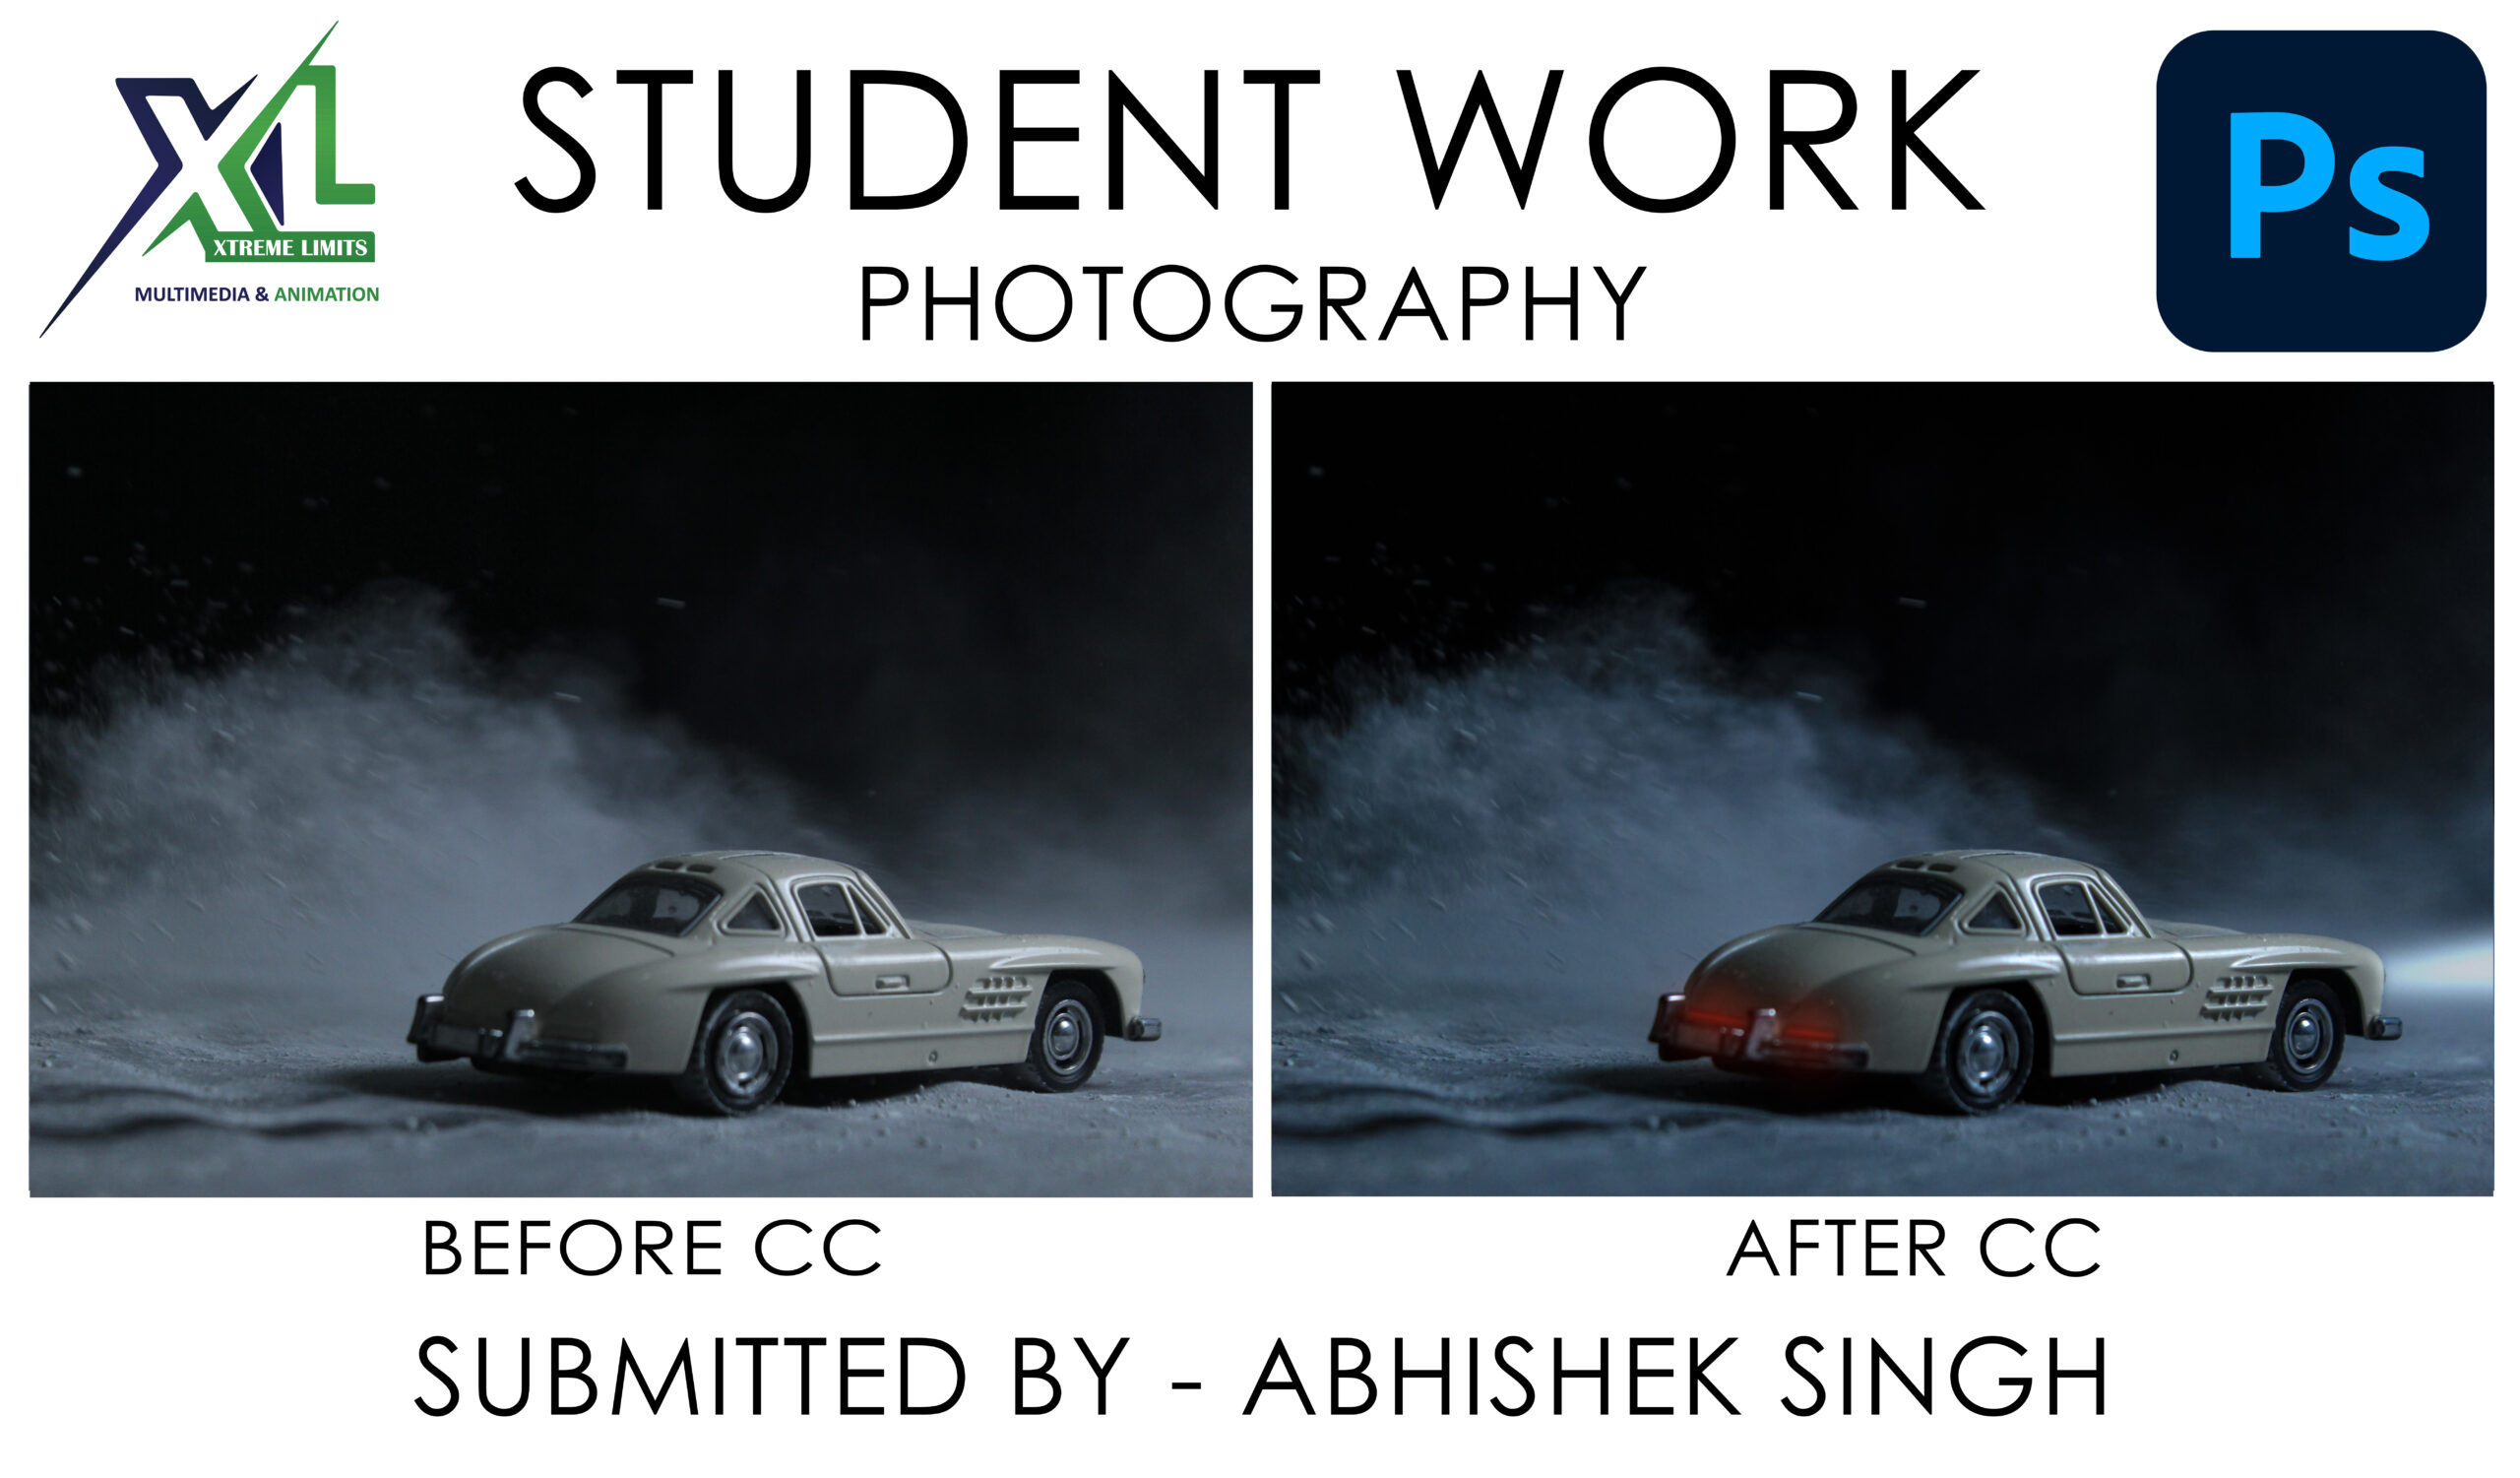 Camera and Direction by Abhishek